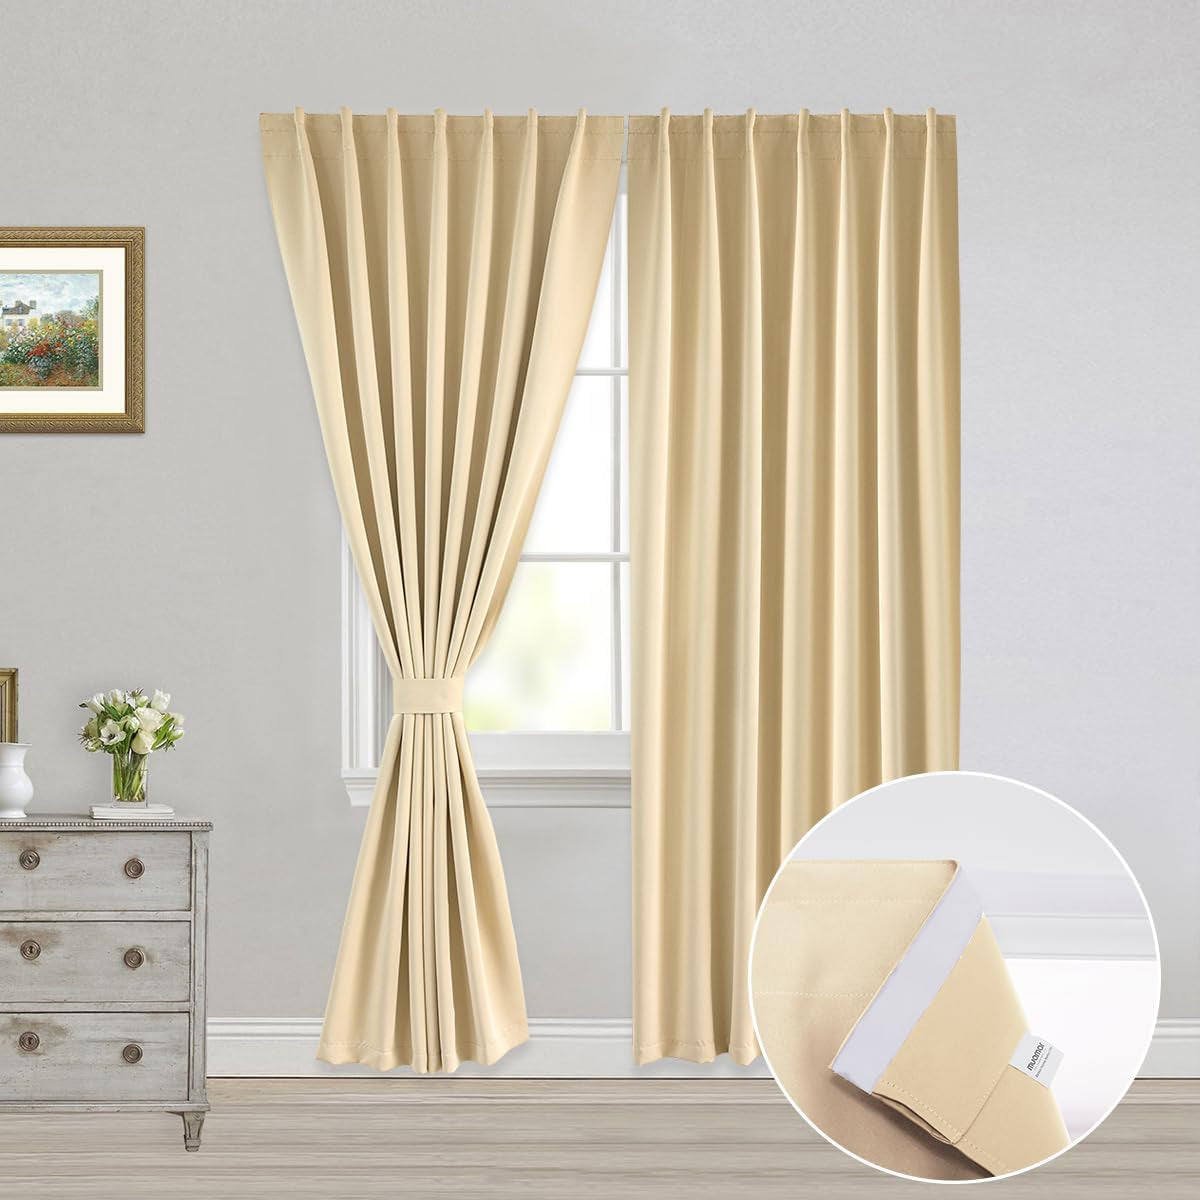 Muamar 2Pcs Blackout Curtains Privacy Curtains 63 Inch Length Window Curtains,Easy Install Thermal Insulated Window Shades,Stick Curtains No Rods, Black 42" W X 63" L  Muamar Beige 42"W X 84"L 